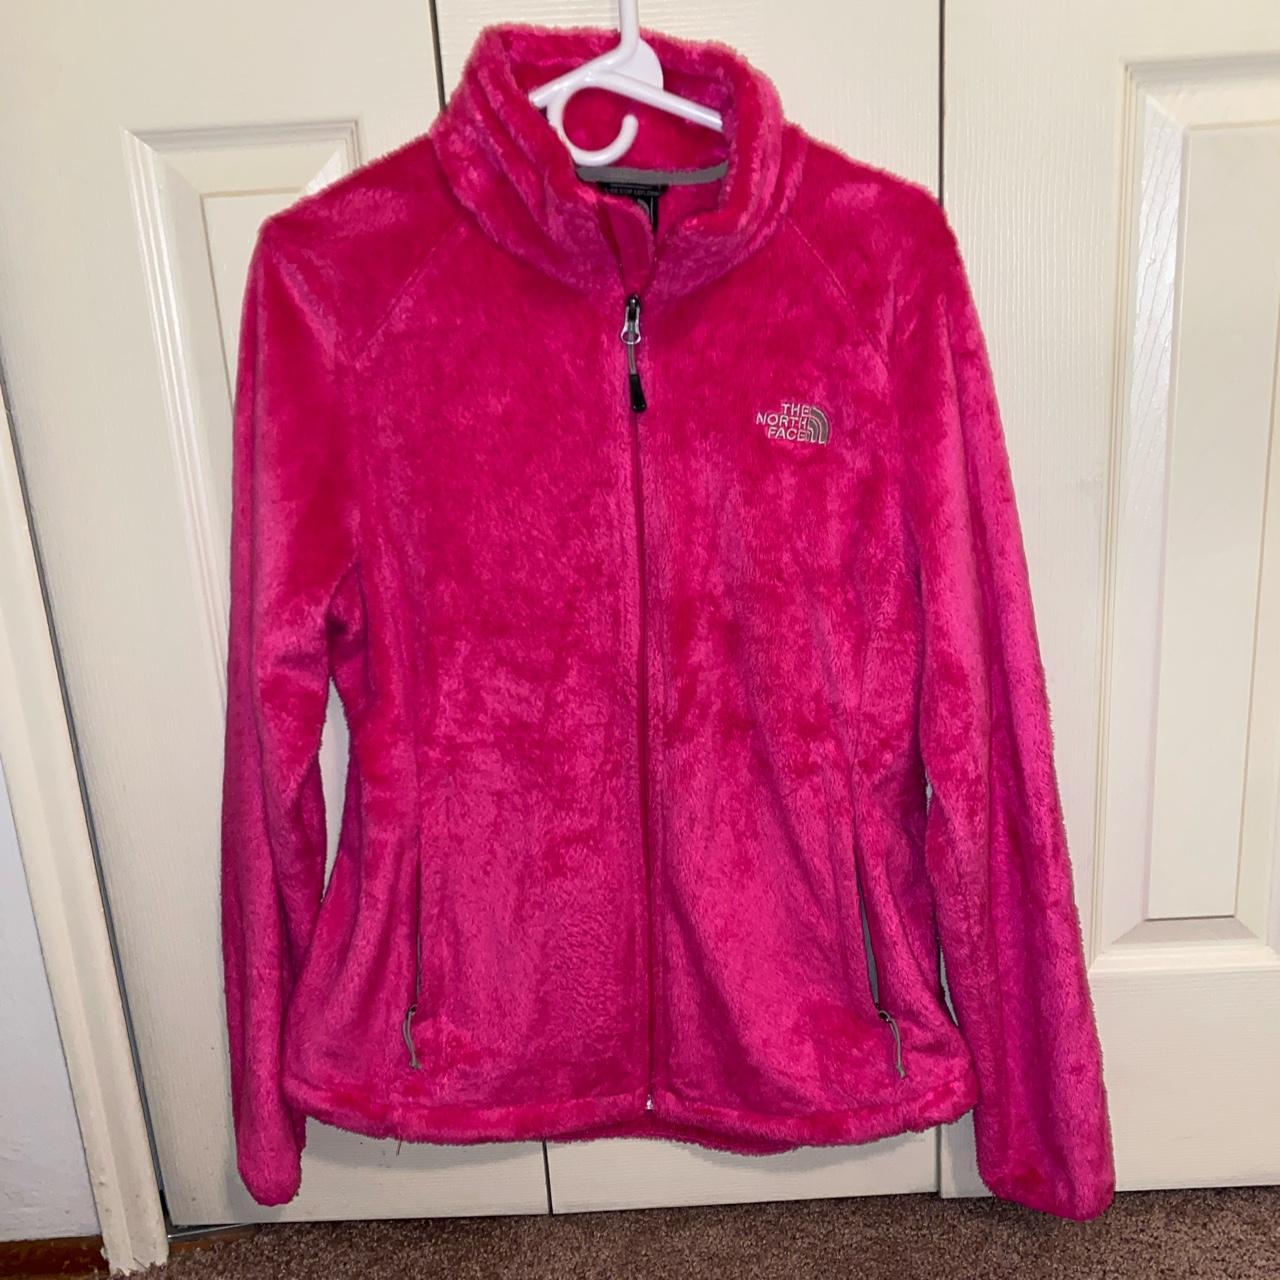 The North Face Women's Pink Coat